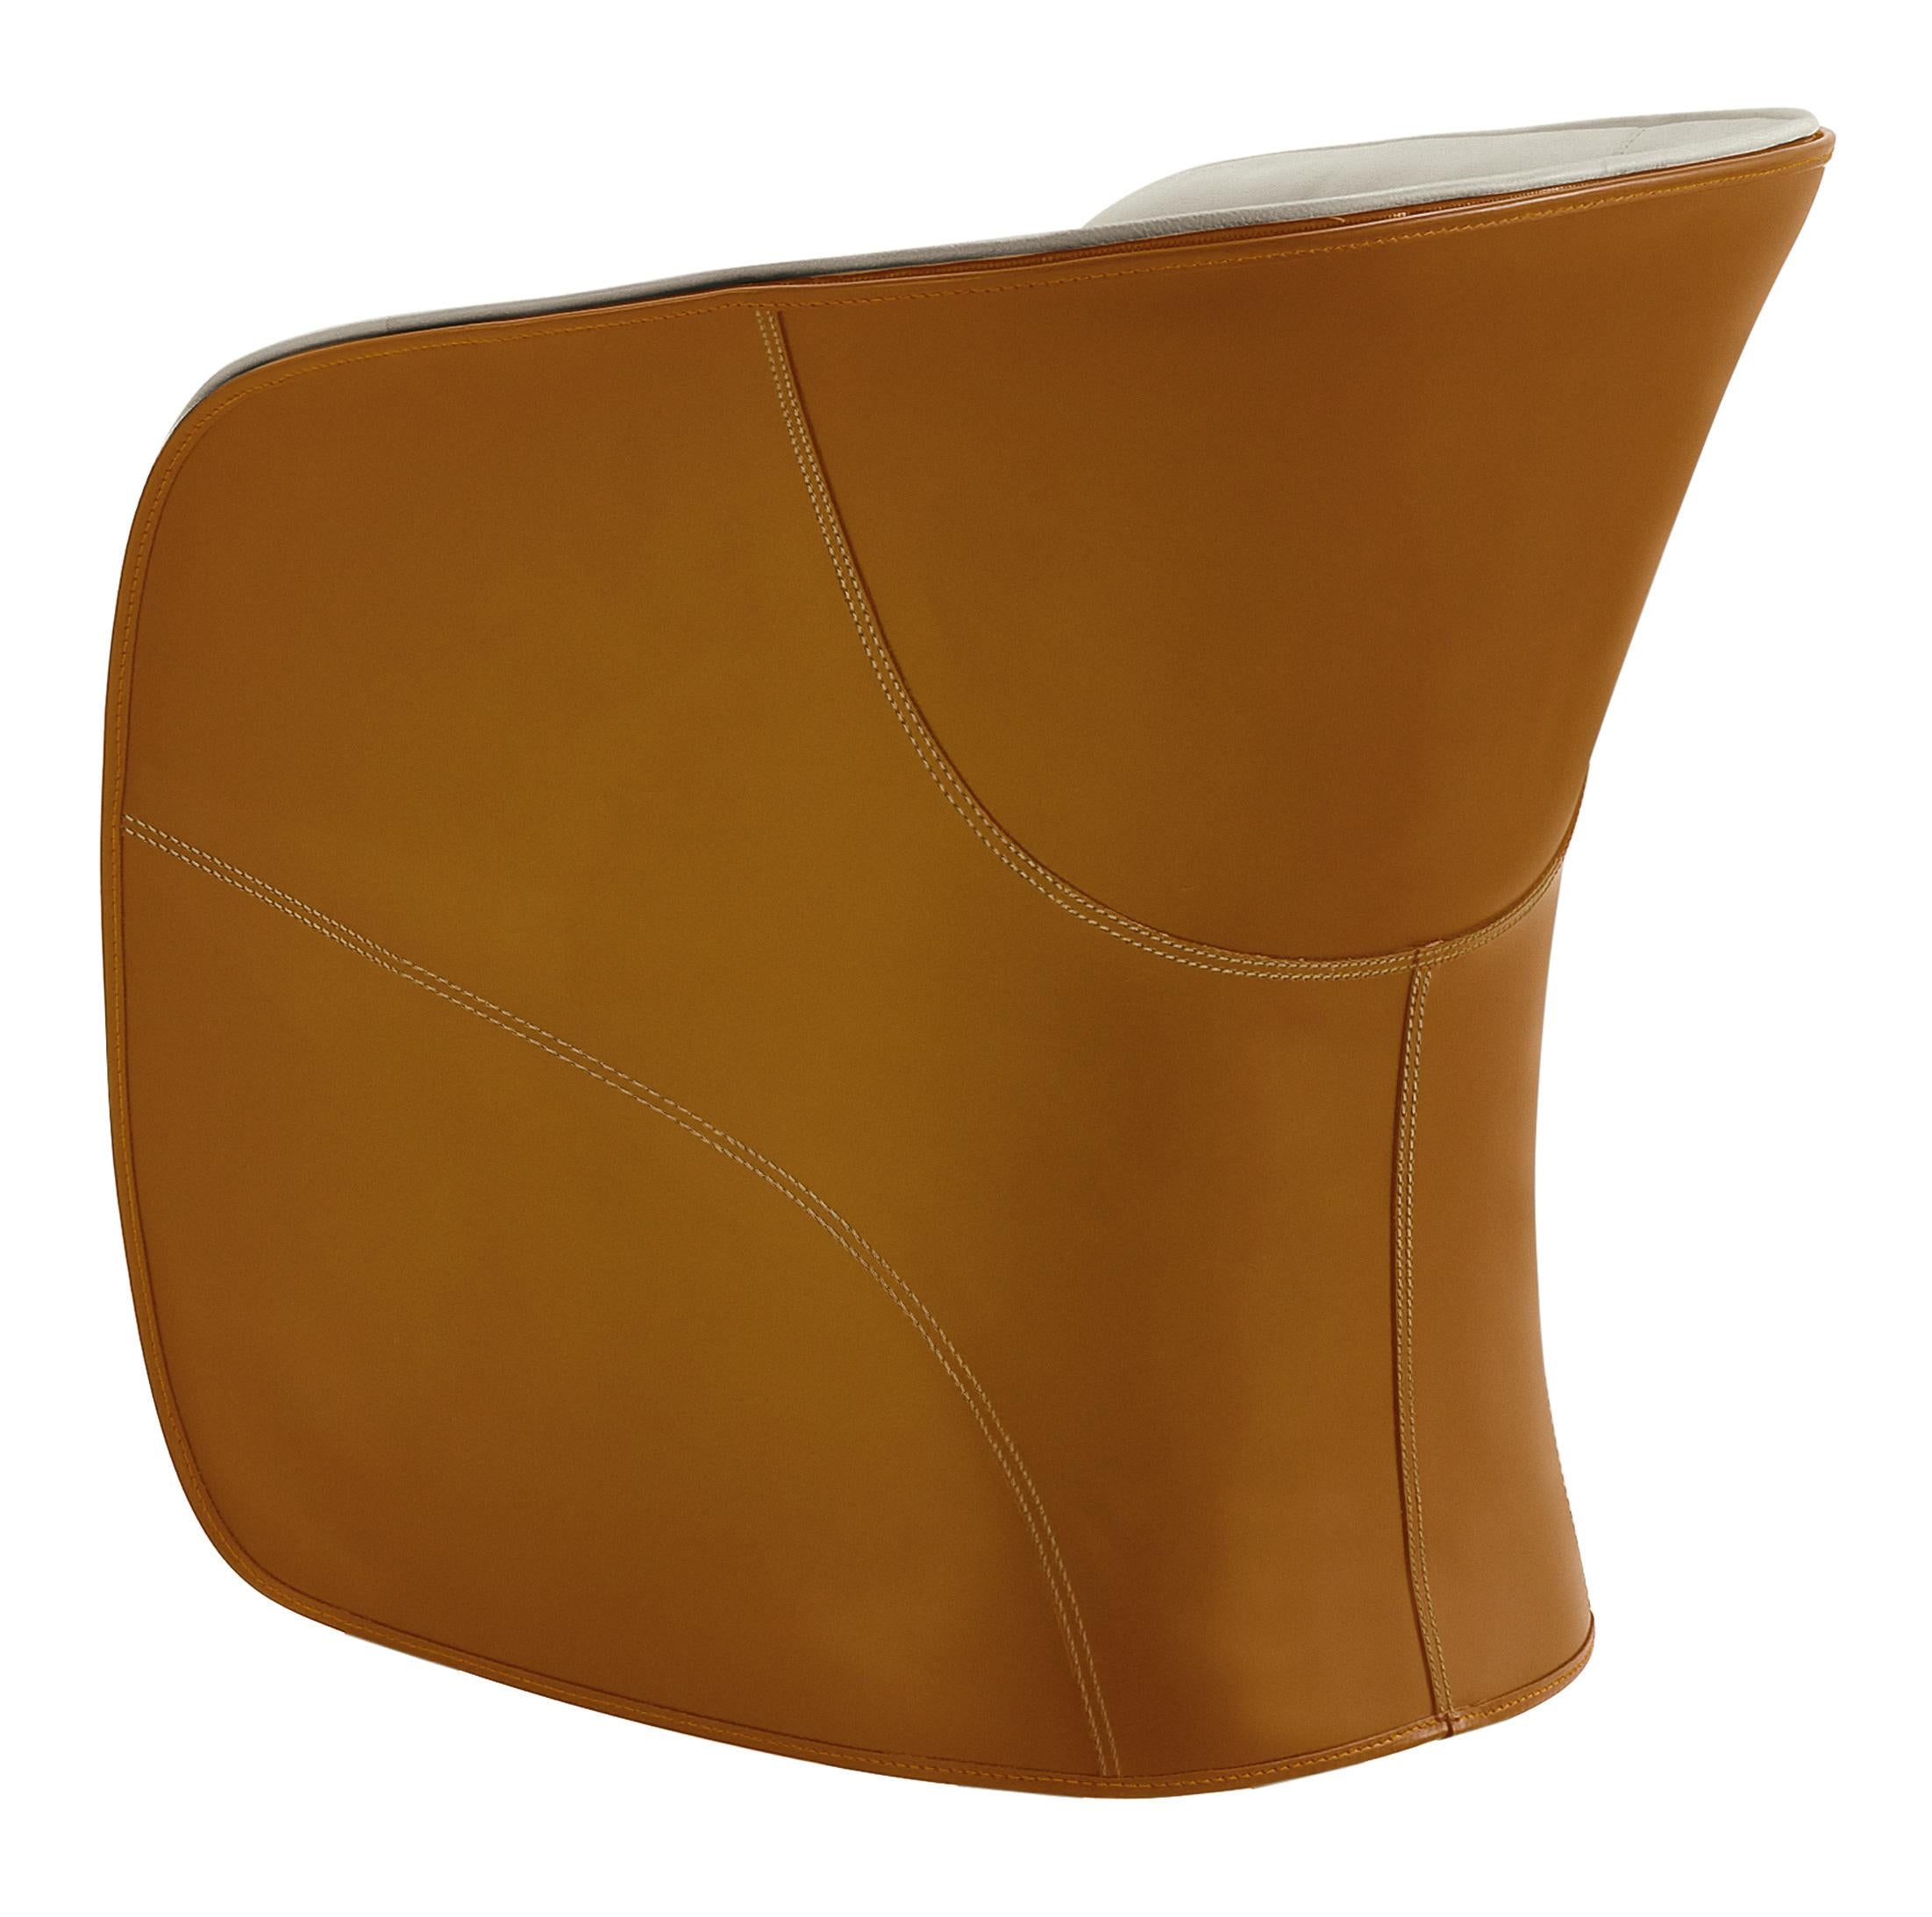 Zanotta Calla Armchair in Beige and Brown Upholstery with Steel Frame by Noé Duchaufour Lawrance

Base on castors or fixed with feet. Steel frame. Upholstery with self-extinguishing polyurethane foam/heat-bound polyester fibre with elastic strips